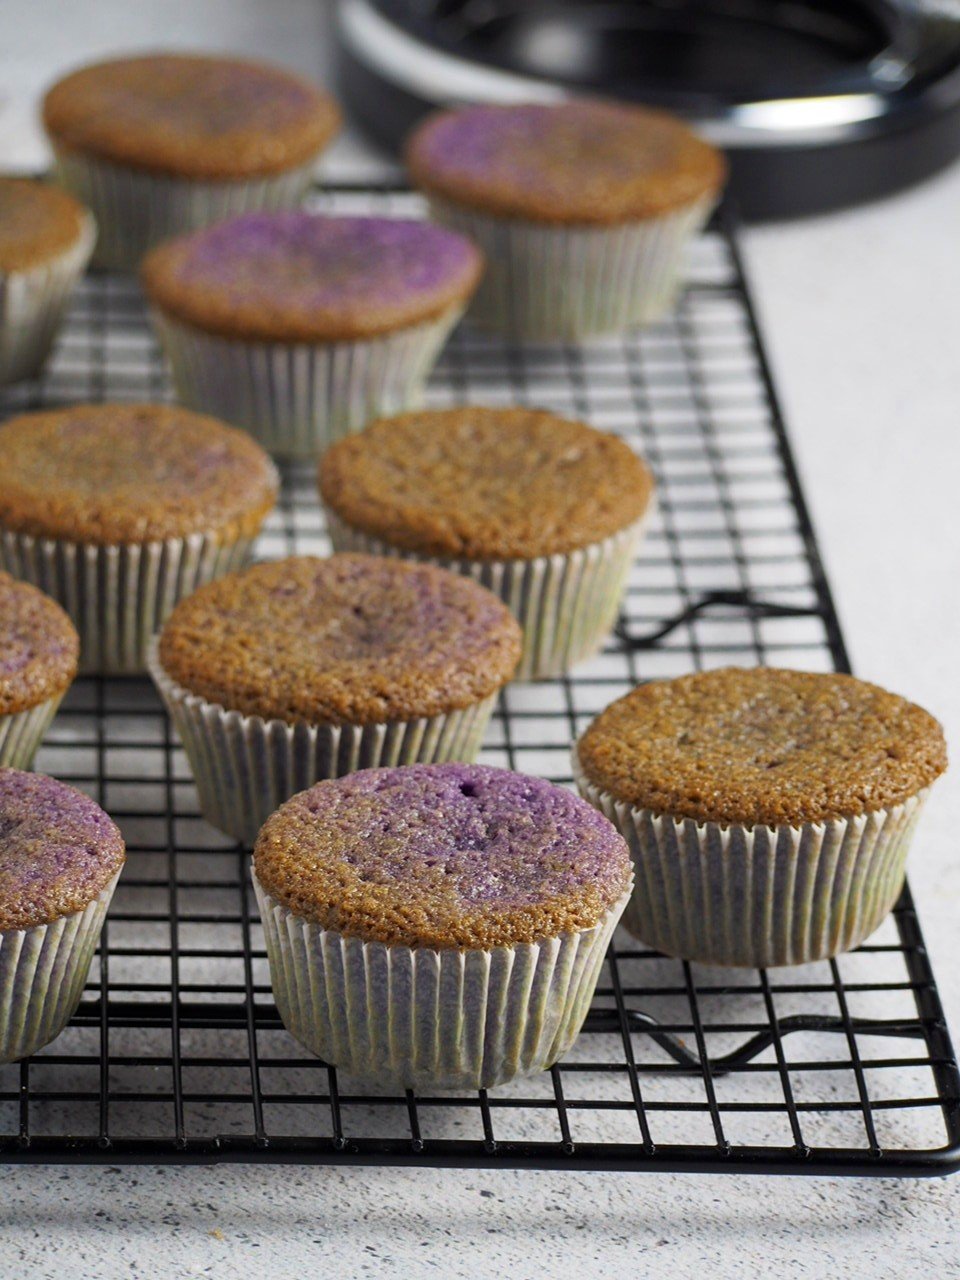 Ube cupcakes without icing yet, cooling on a wire rack.